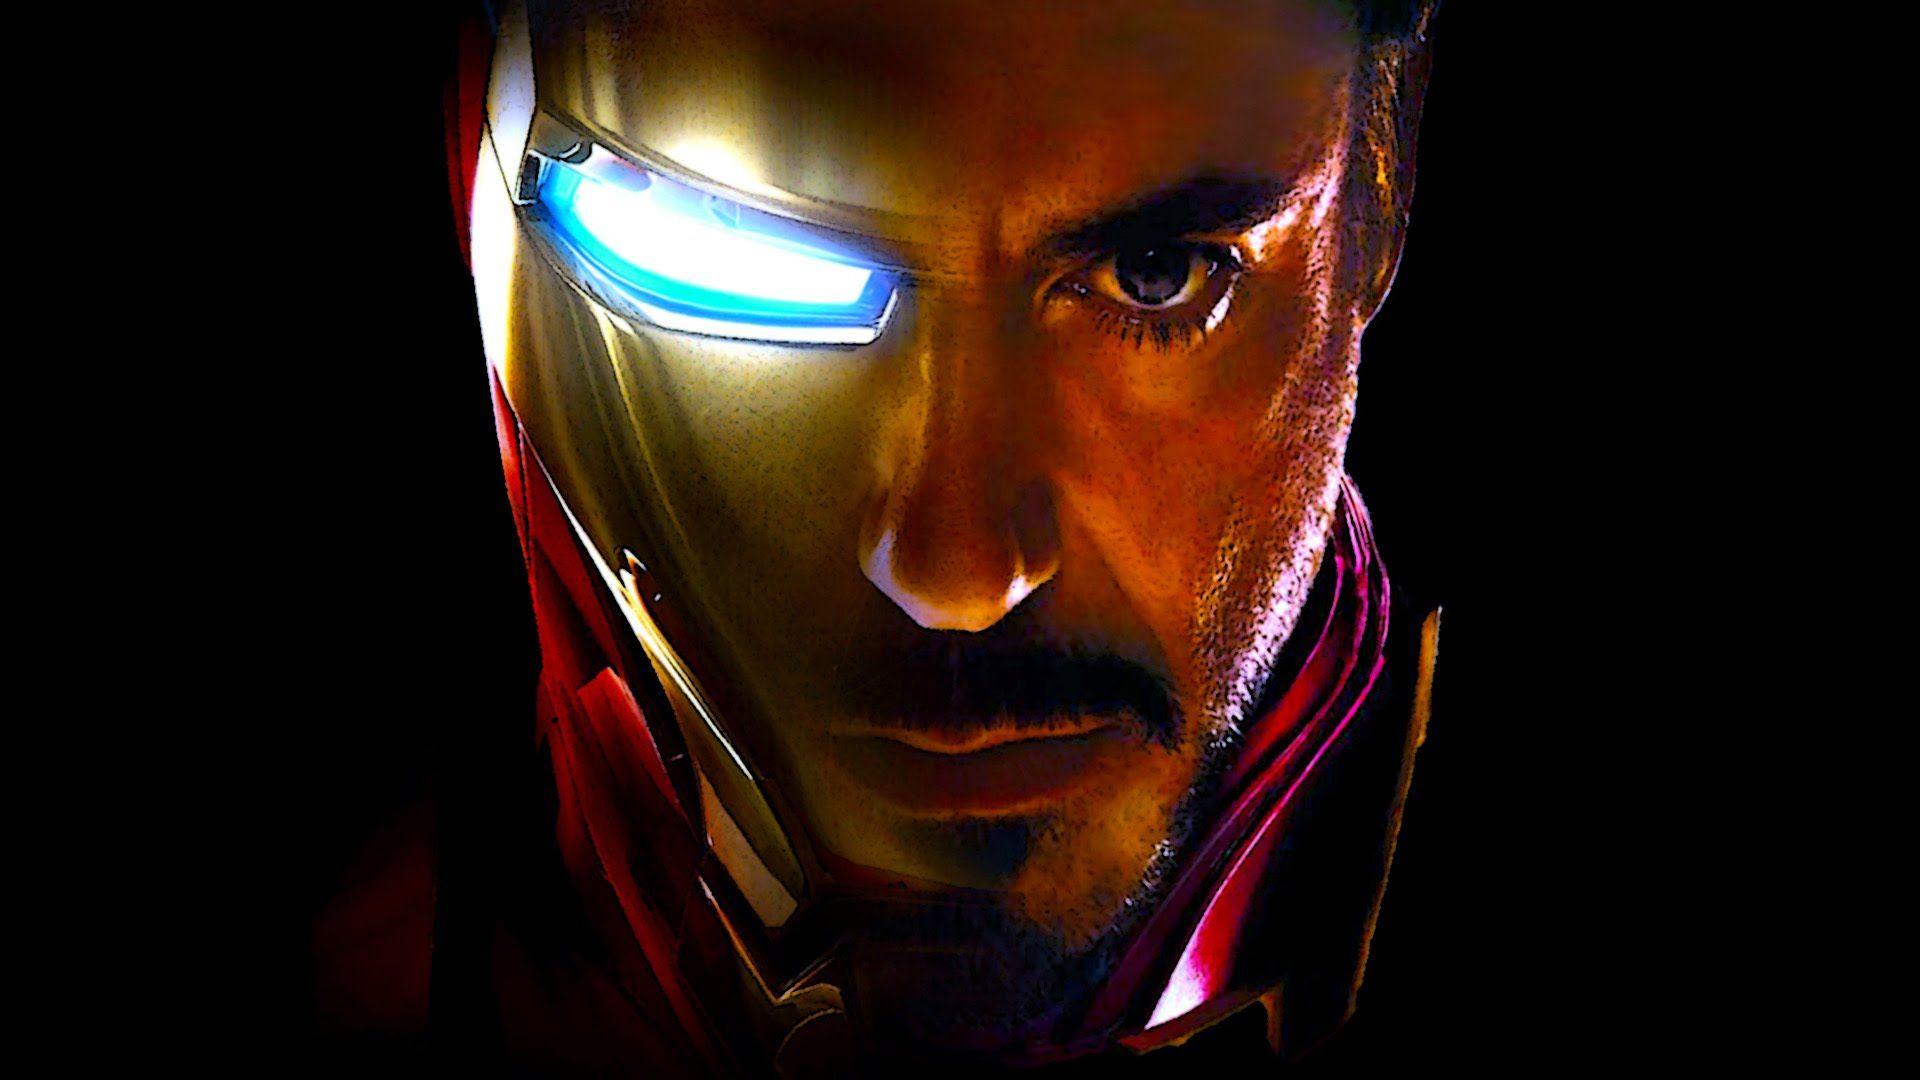 Iron Man Wallpaper with Face Image (37 Pics) Wallpaper. Wallpaper Download. High Resolution Wallpaper